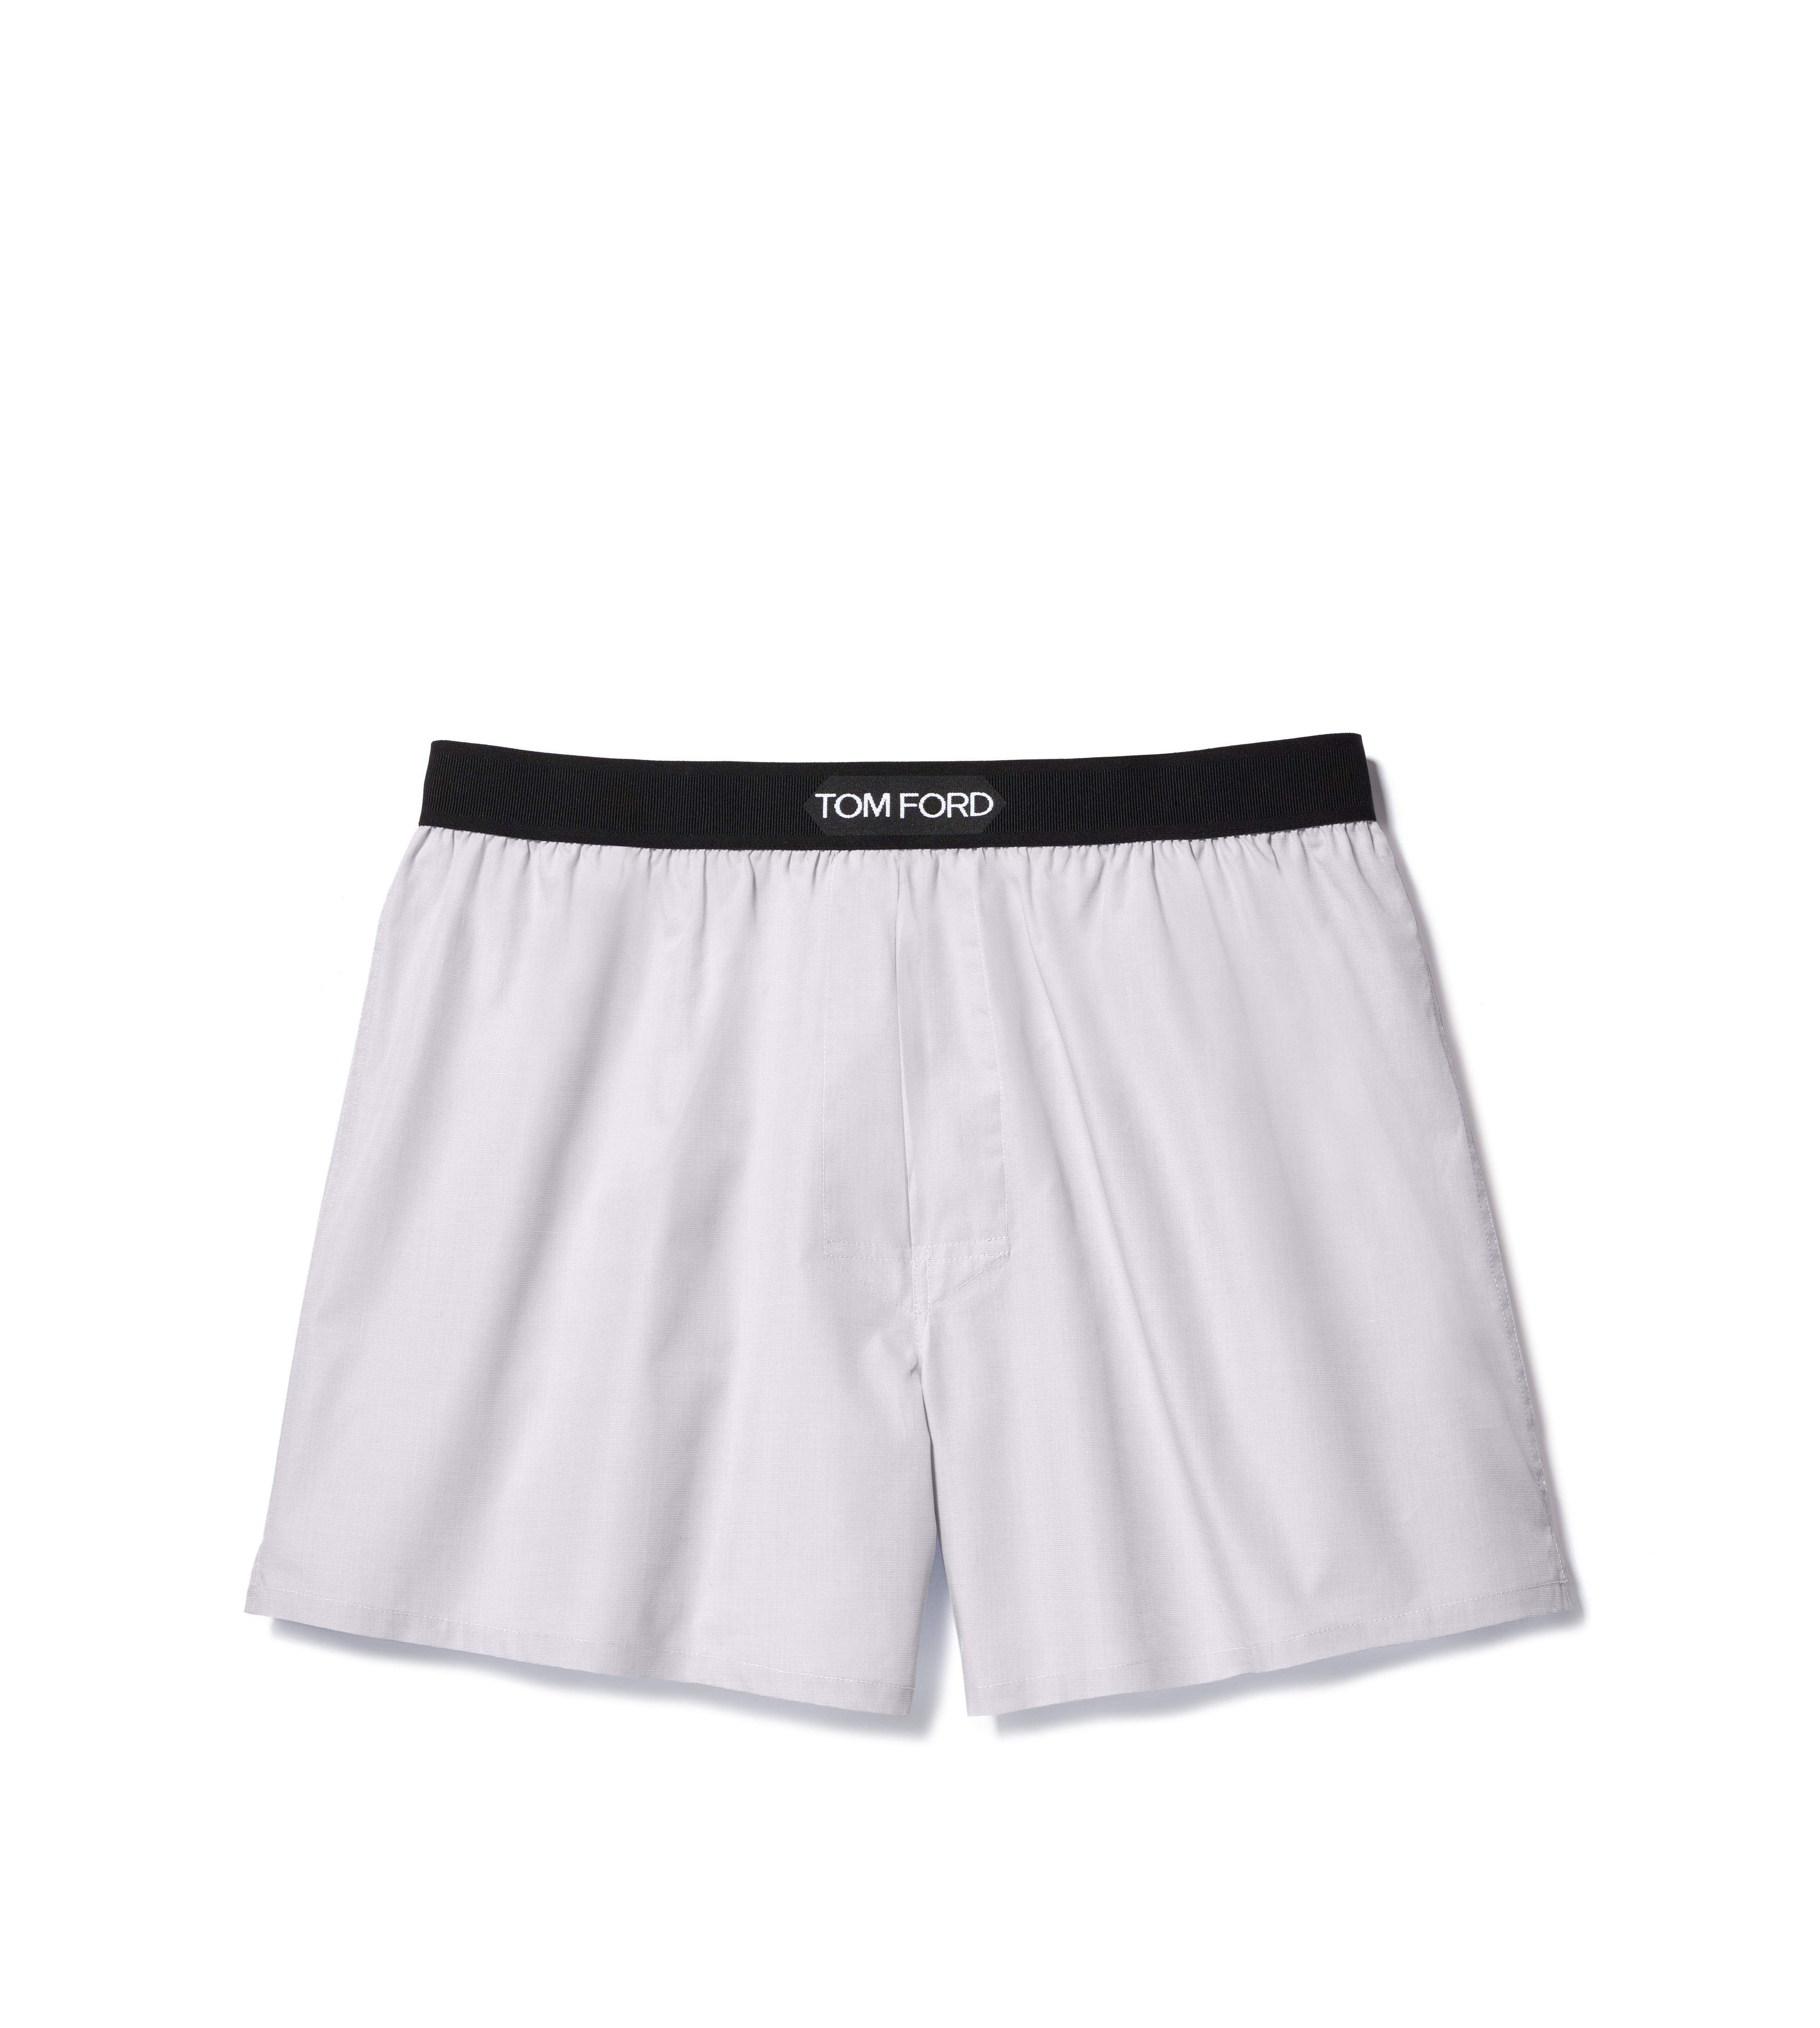 BOXERS Collection | Tom Ford